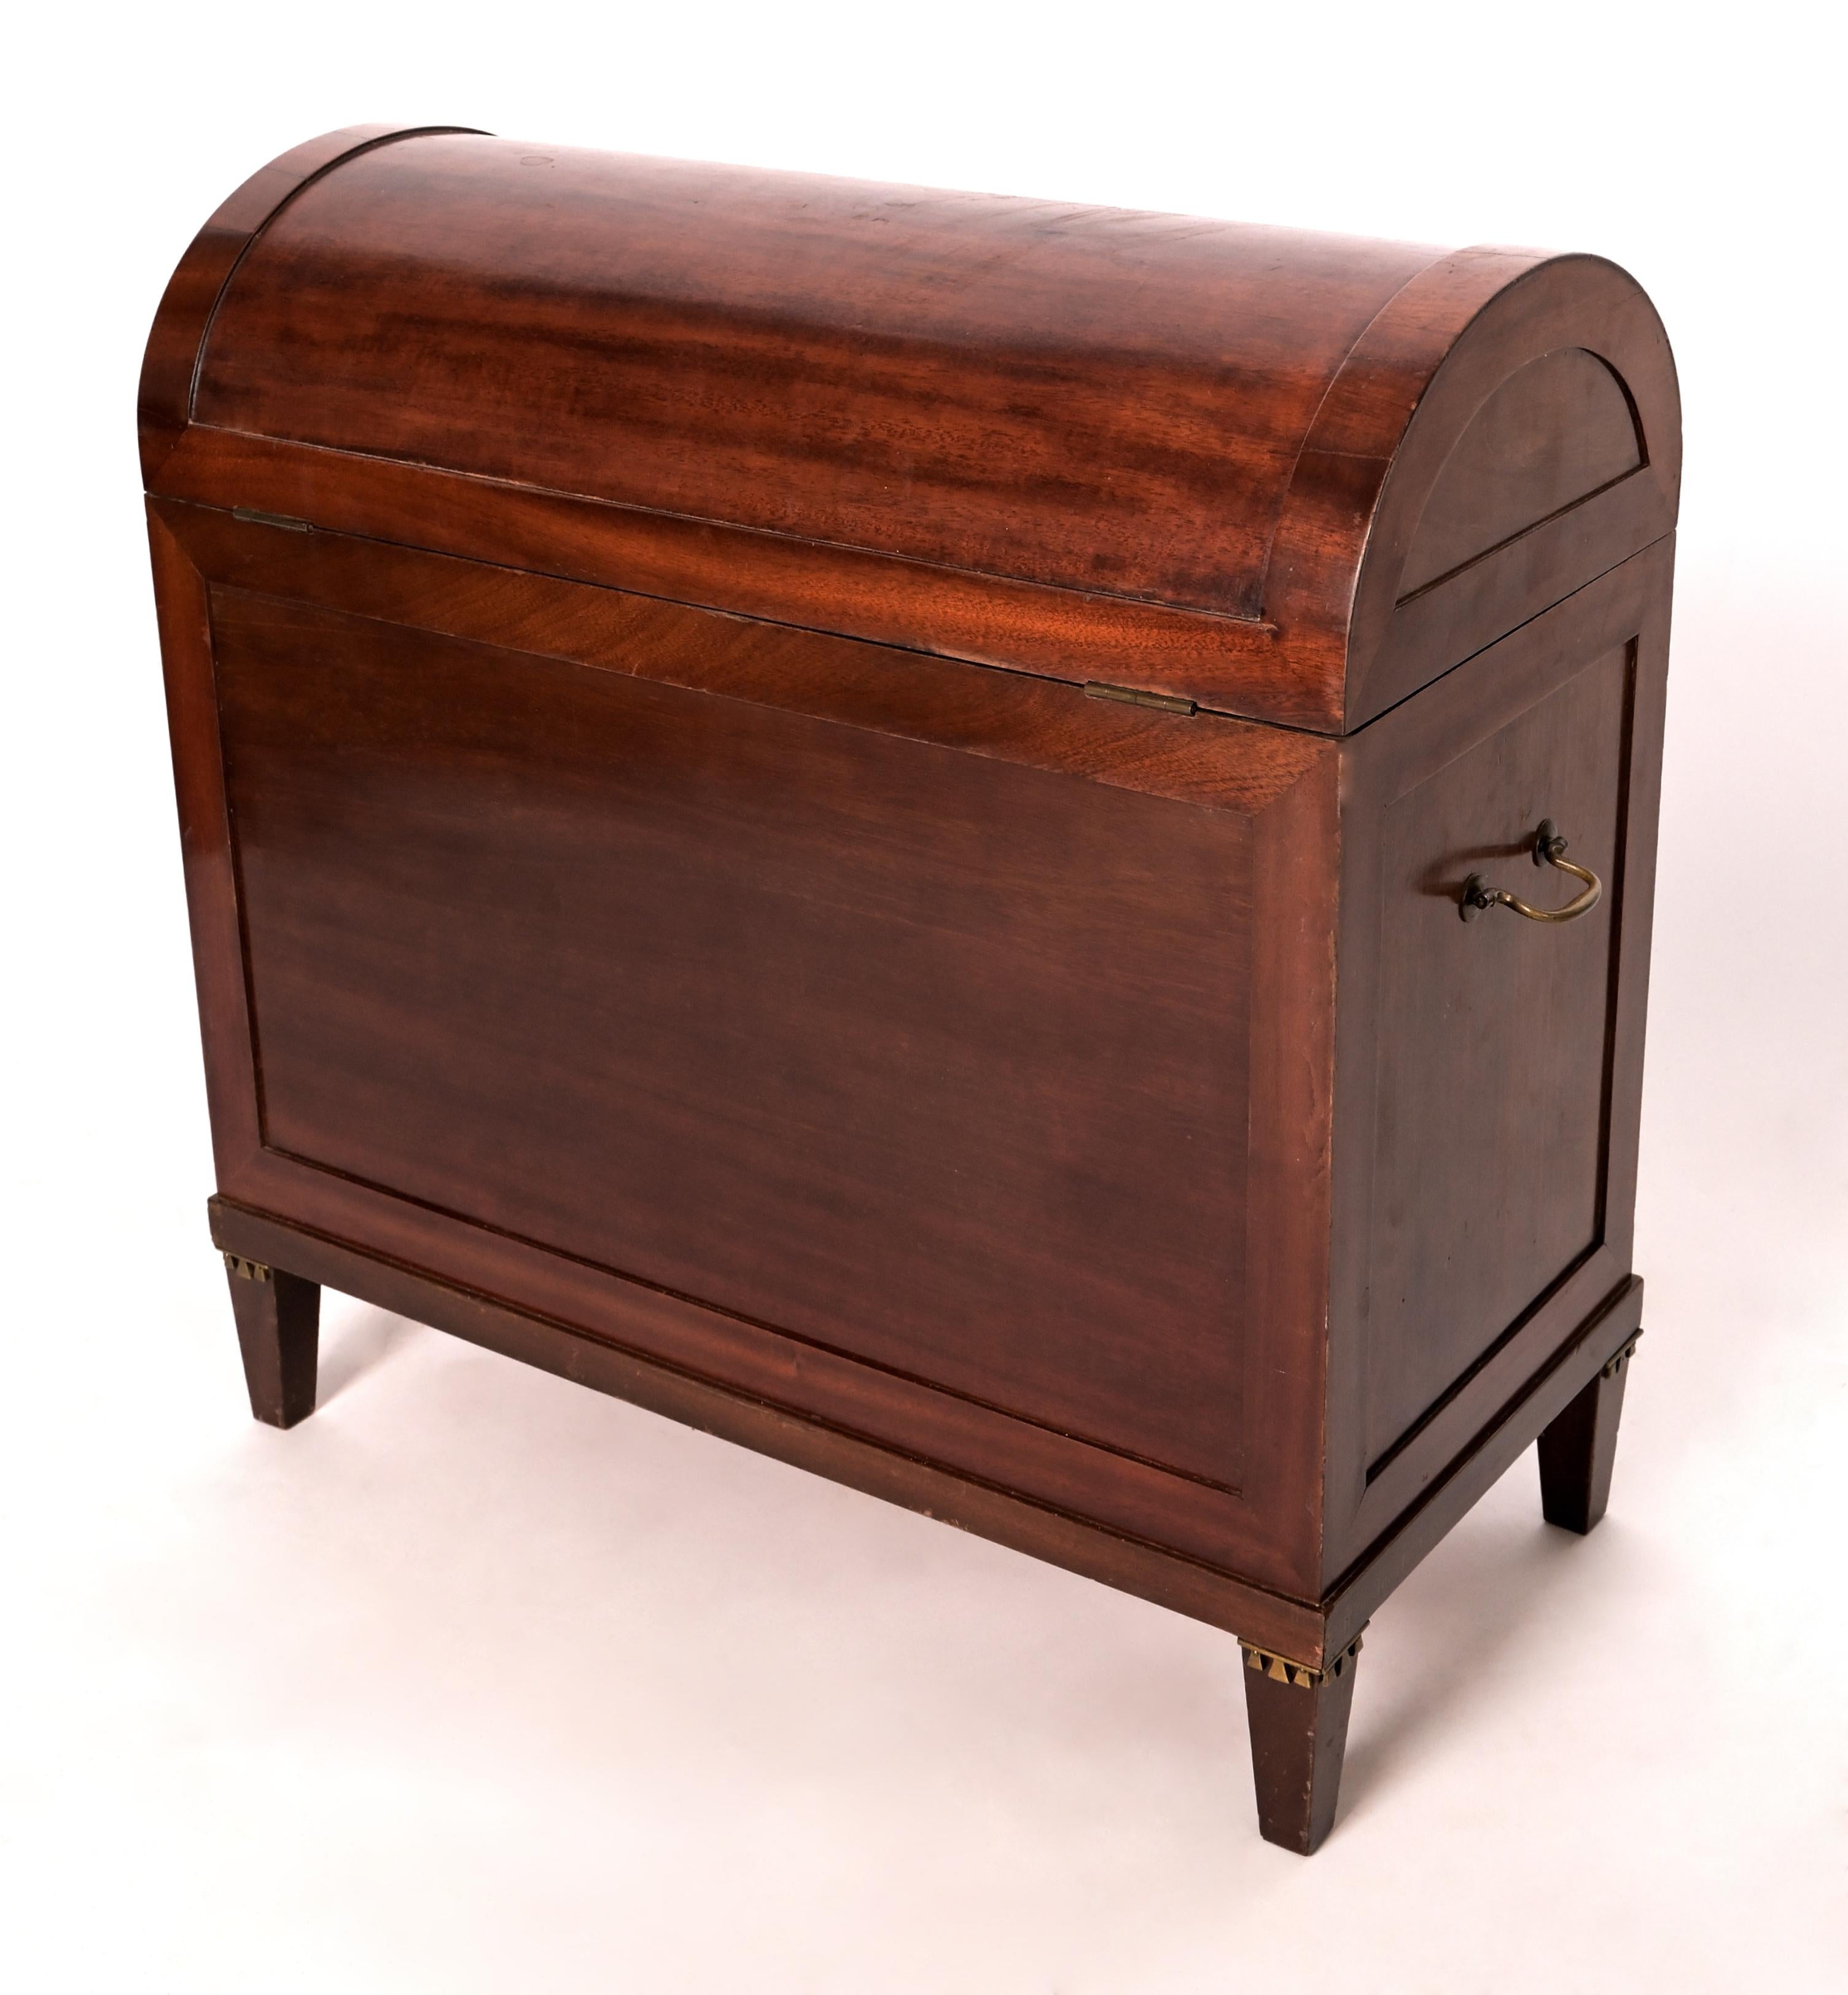 Swedish Gustavian Mahogany box with Domed Lid In Good Condition For Sale In New York, NY